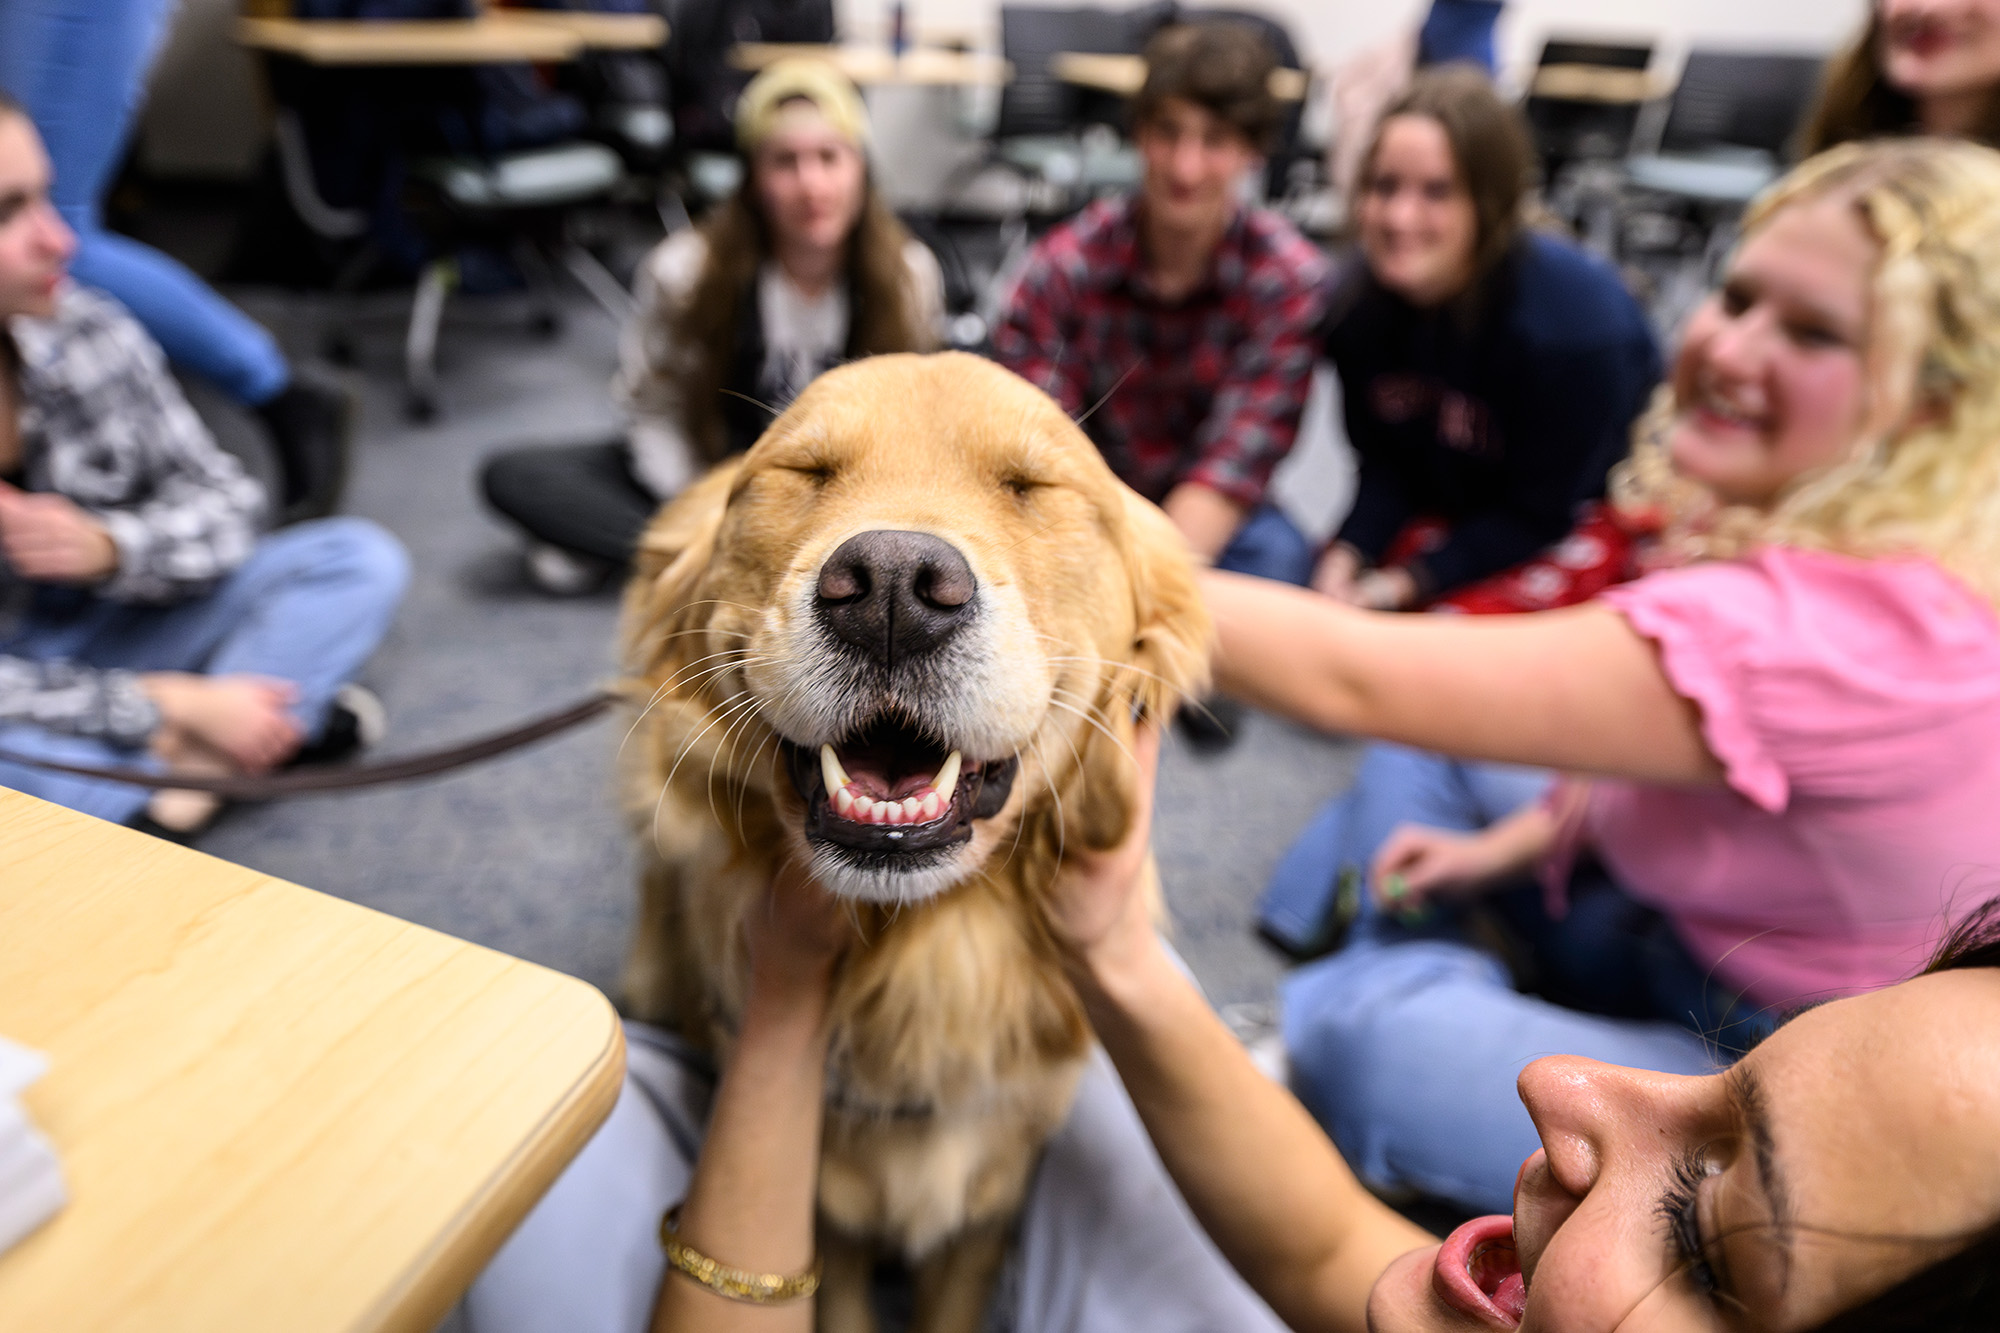 Anny the golden retriever flashes the pearly whites while spreading smiles to UW students.